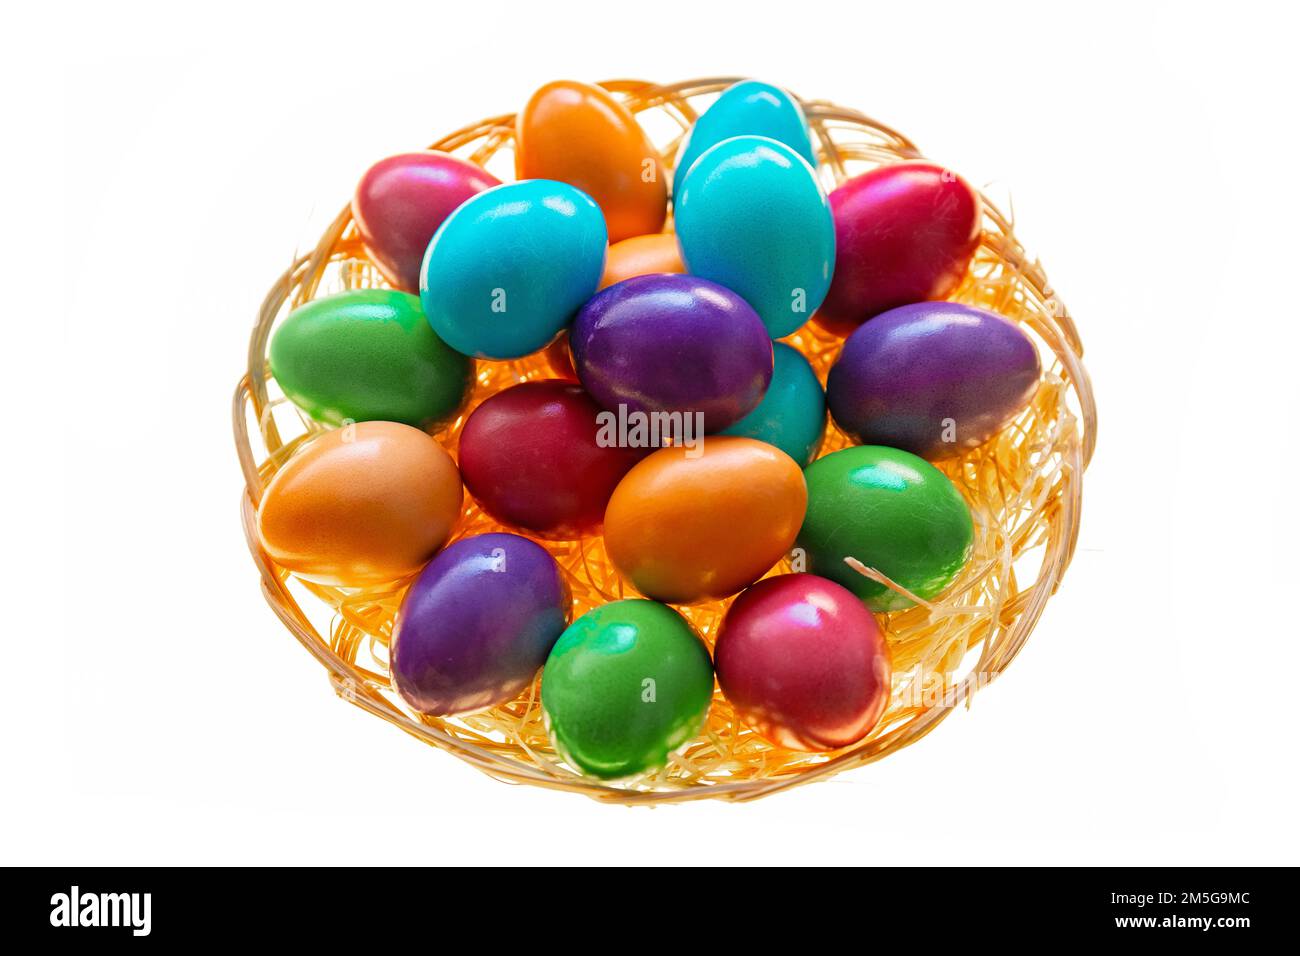 Easter multicolored painted eggs in a wicker bowl on a white background.Easter food. Spring religious holiday symbol. Easter tradition. Christian and Stock Photo